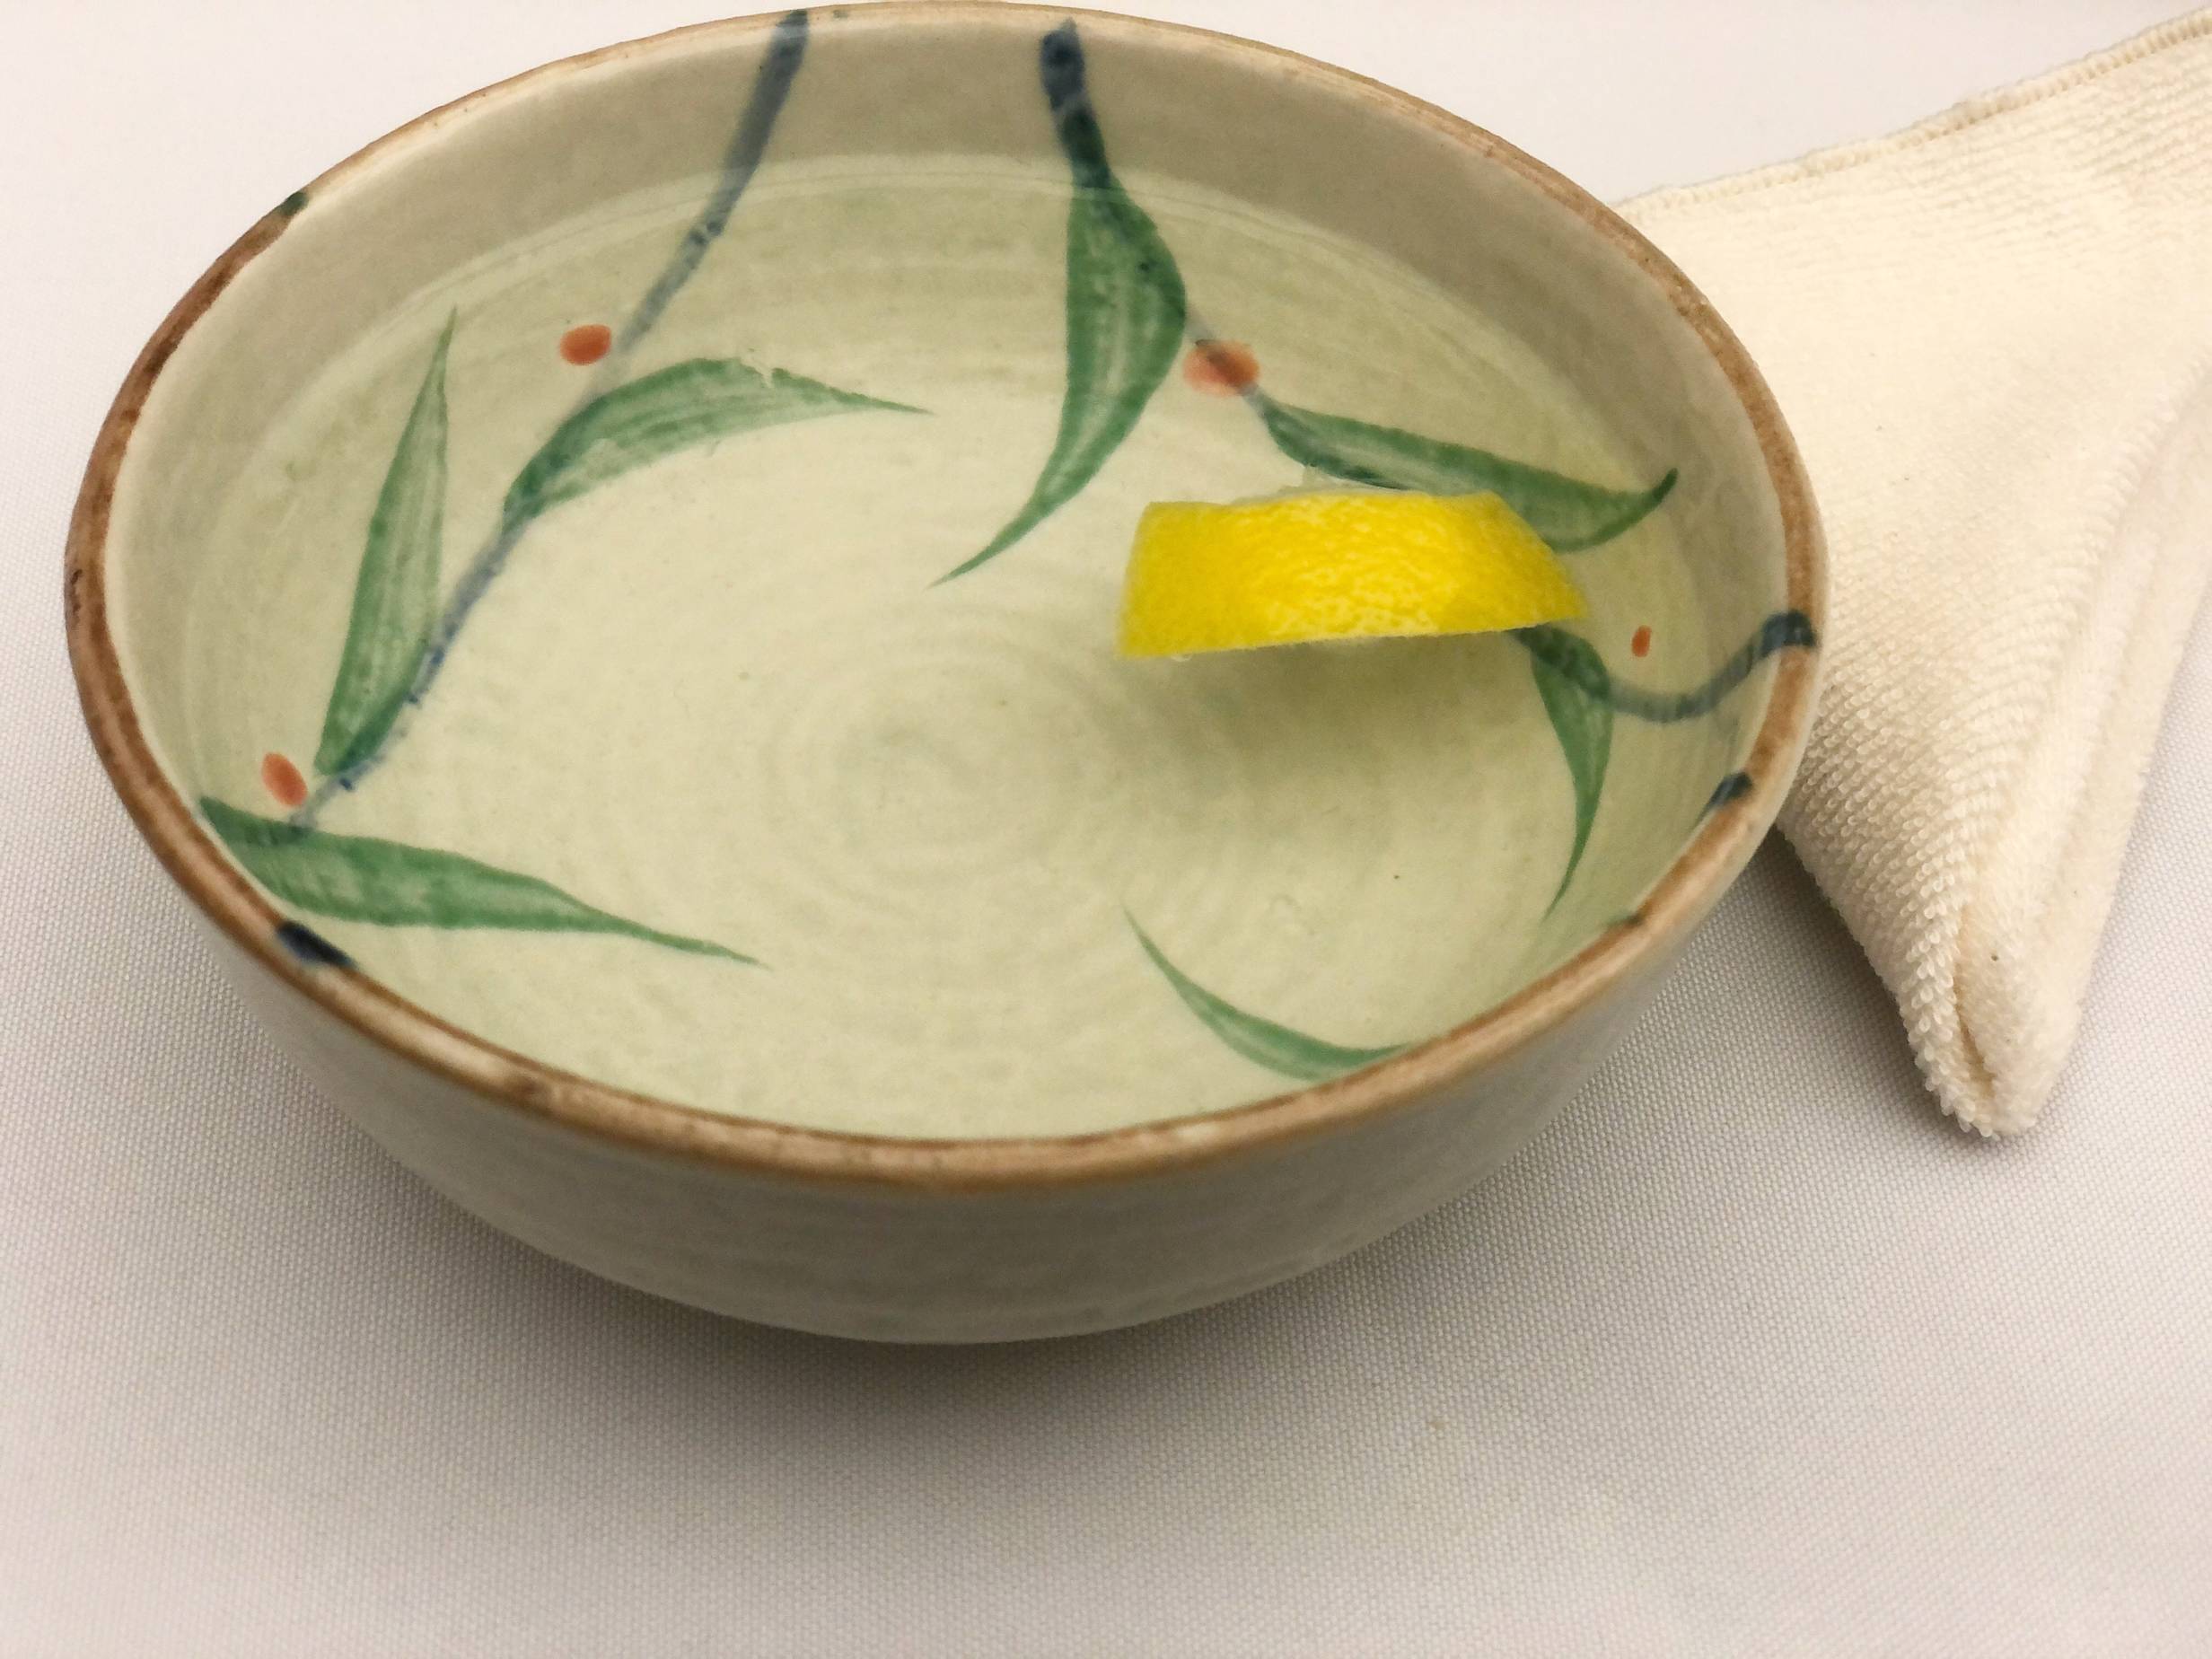 A ceramic bowl with painted leaves and stems is filled with water and a small piece of lemon. It sits on a table with a triangularly folded cotton napkin. Photo by Alyssa Buckley.